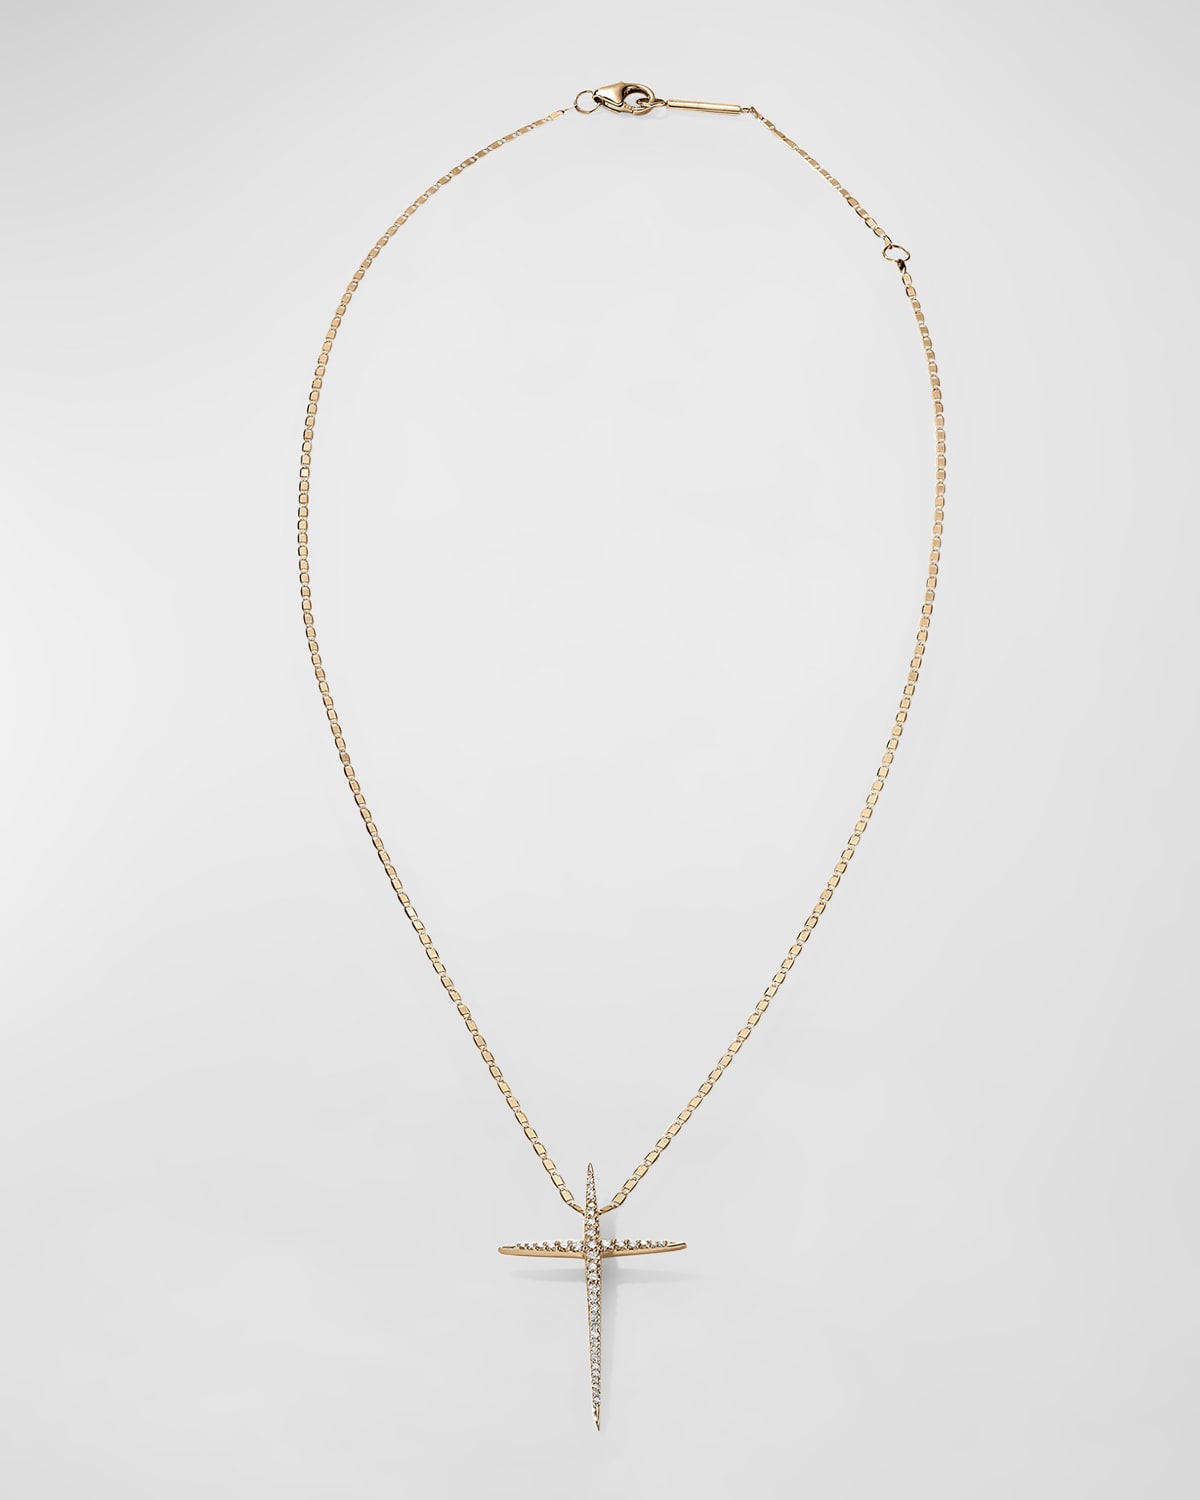 LANA FLAWLESS SKINNY POINTED CROSS PENDANT NECKLACE